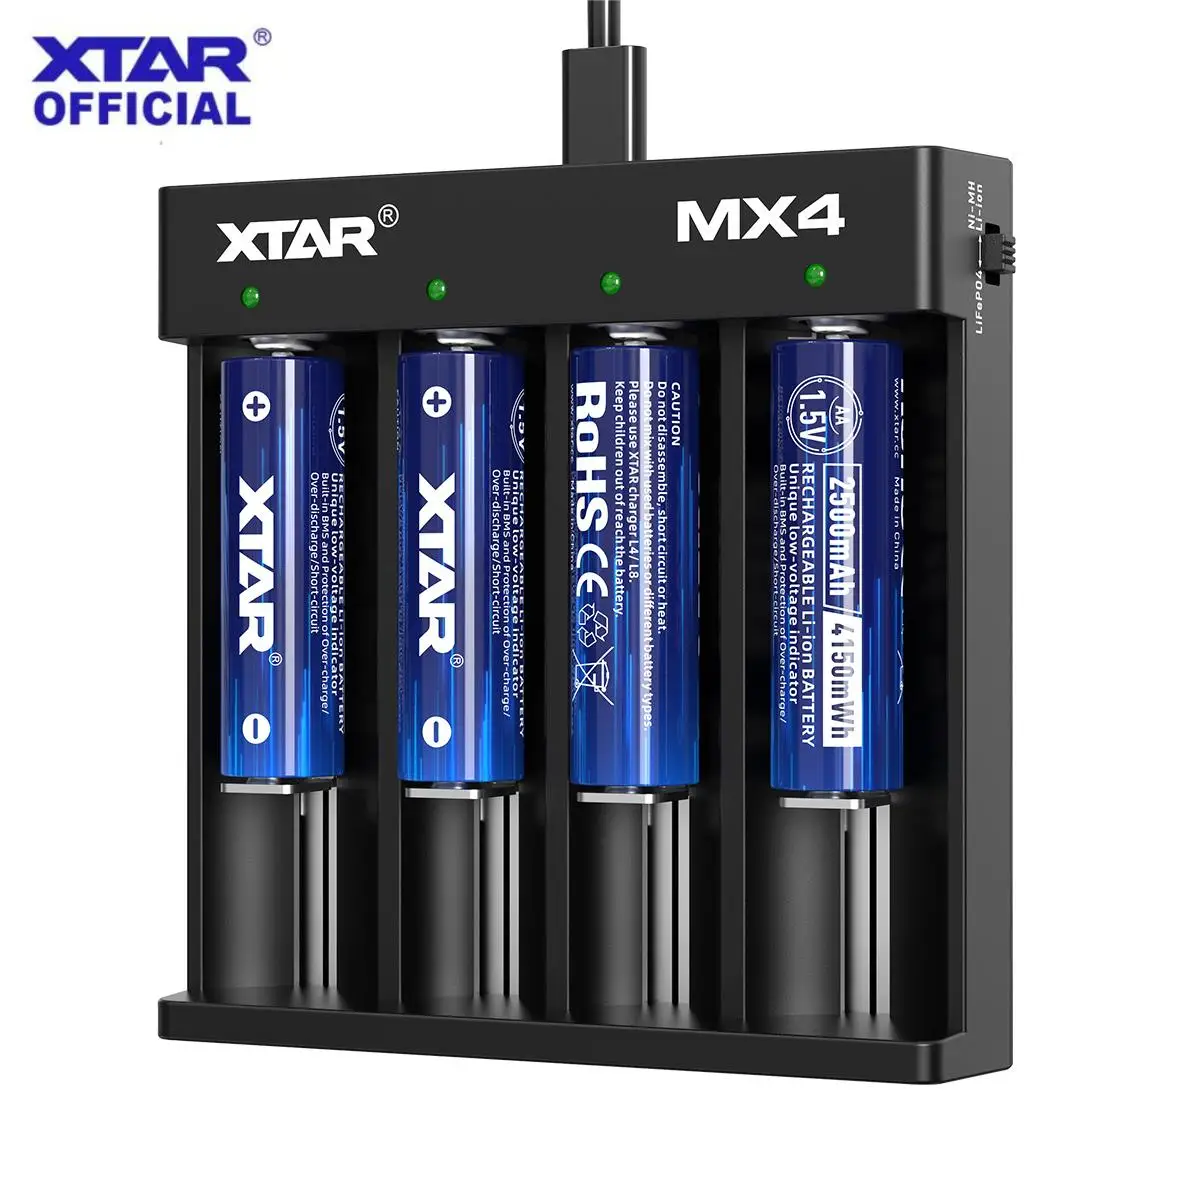 

XTAR MX4 New Universal Smart Charger Set Type-C Plug Rechargeable AA Batteries AAA Battery Charger 18650 Charger Safes Lipo